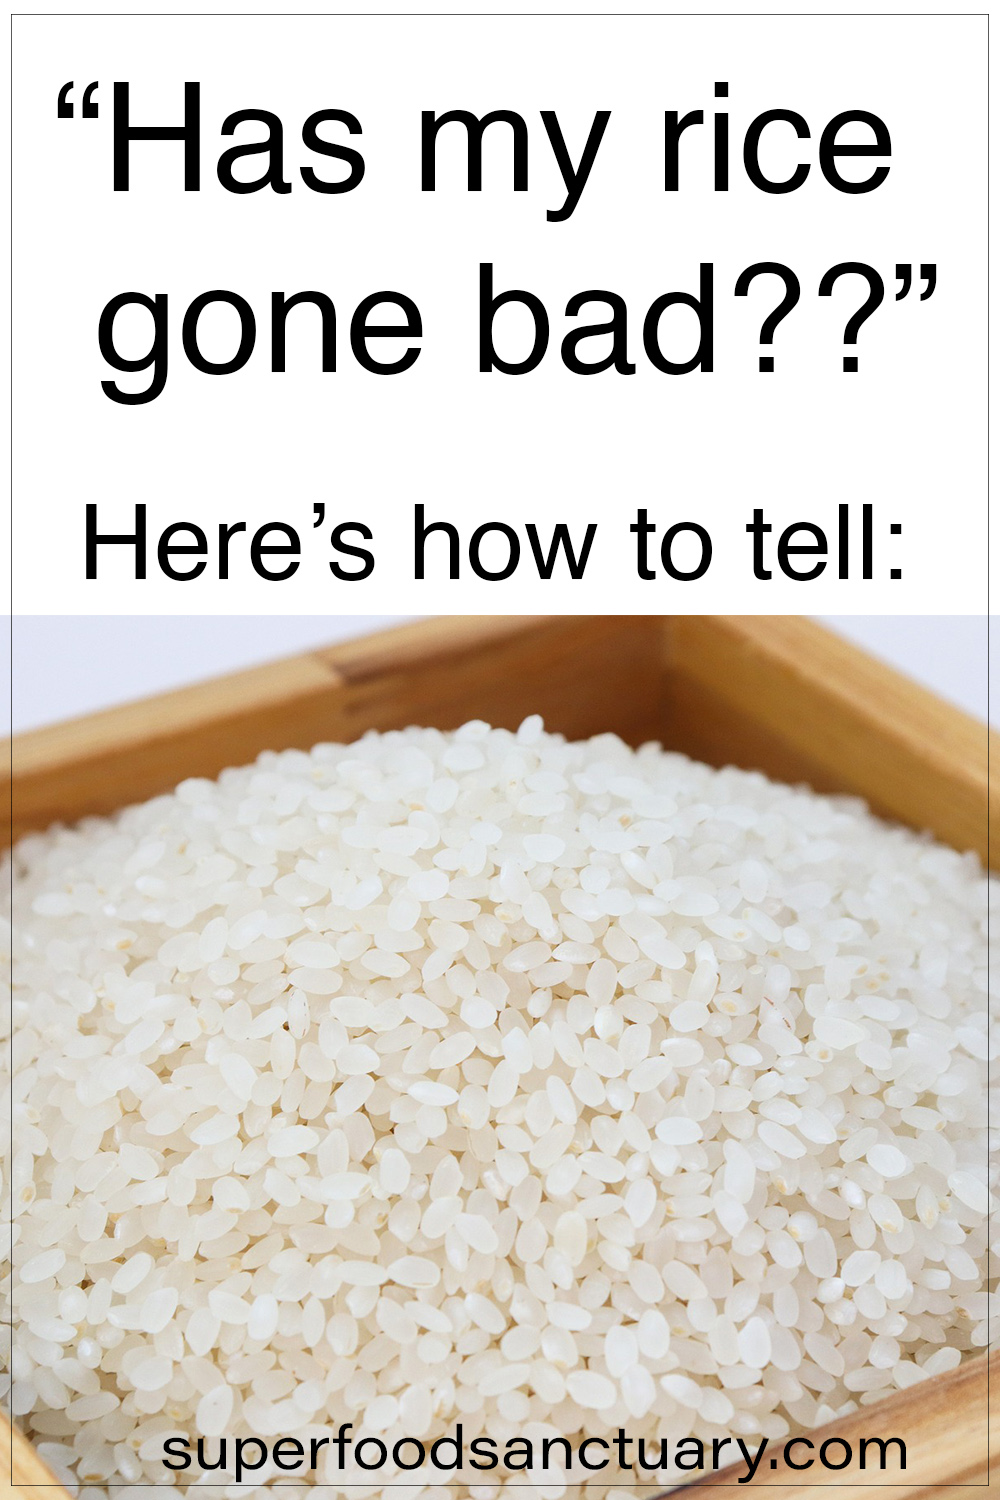 Image of spoiled rice